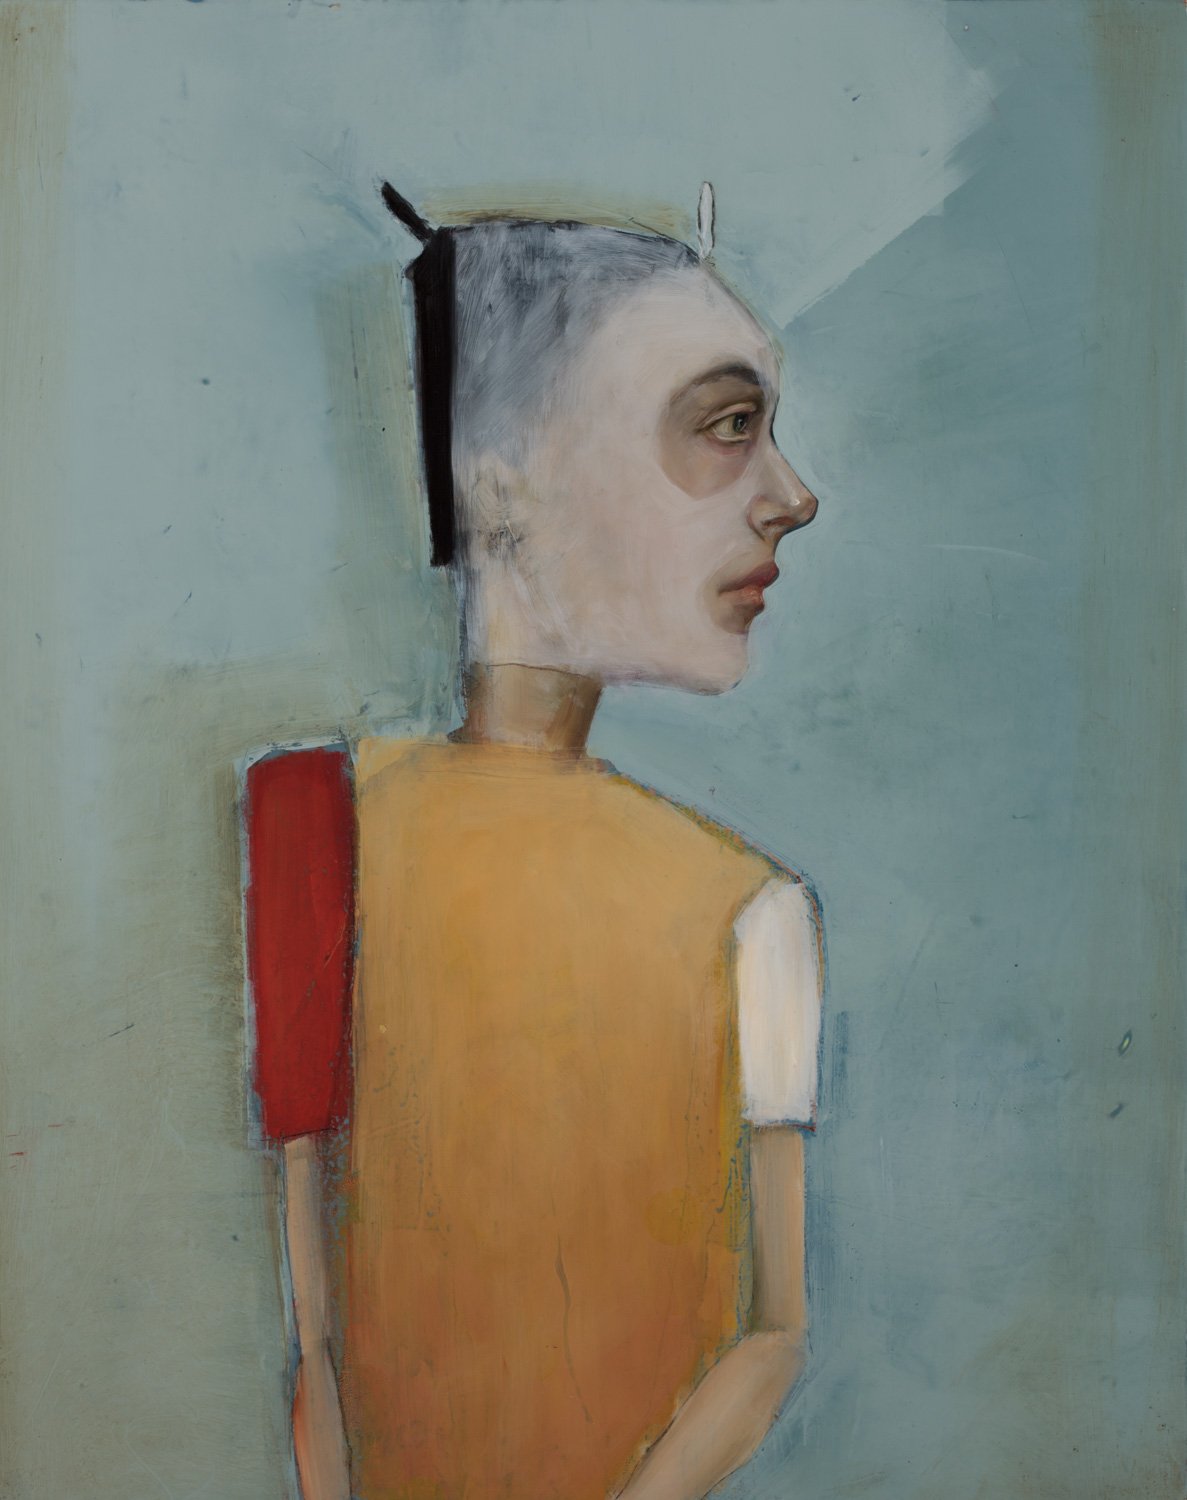  Michele Mikesell,  La Mascara,  2021, Oil in canvas, 20x16 inches / 50x40cm 